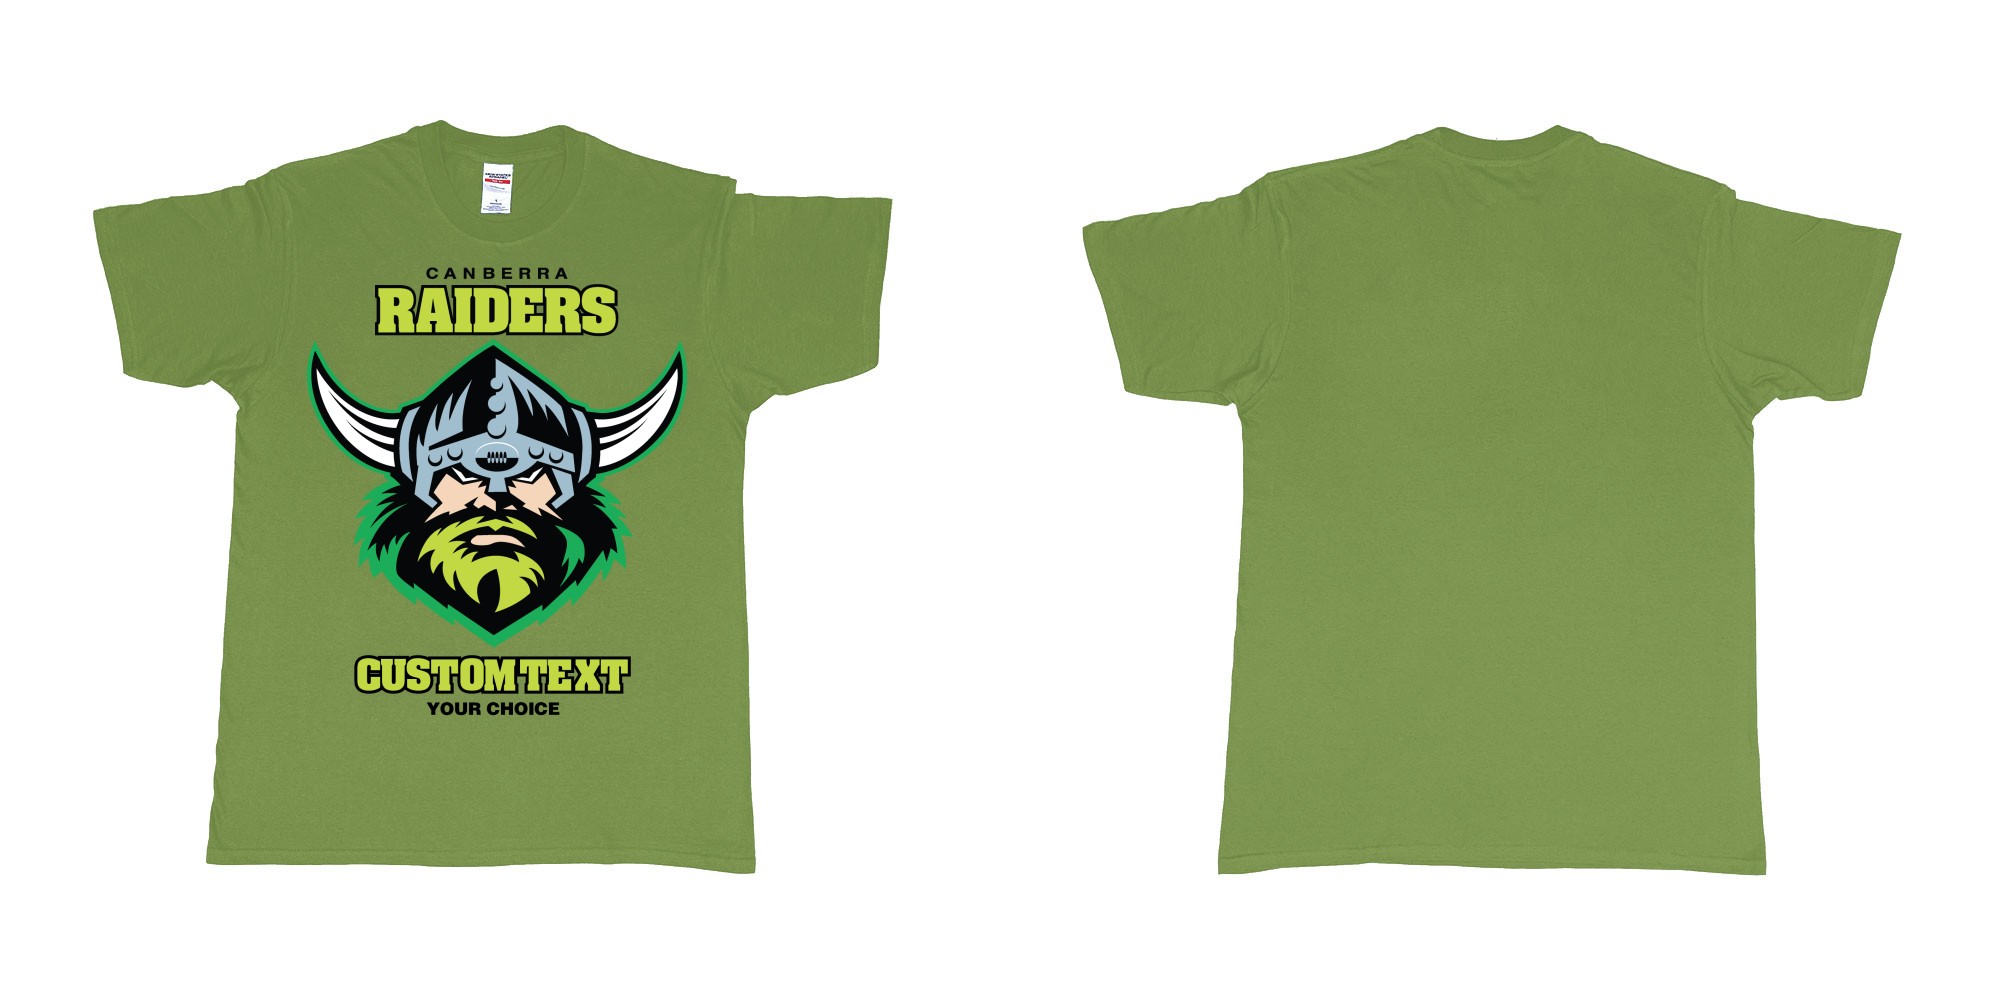 Custom tshirt design canberra raiders nrl logo own printed text near you in fabric color military-green choice your own text made in Bali by The Pirate Way